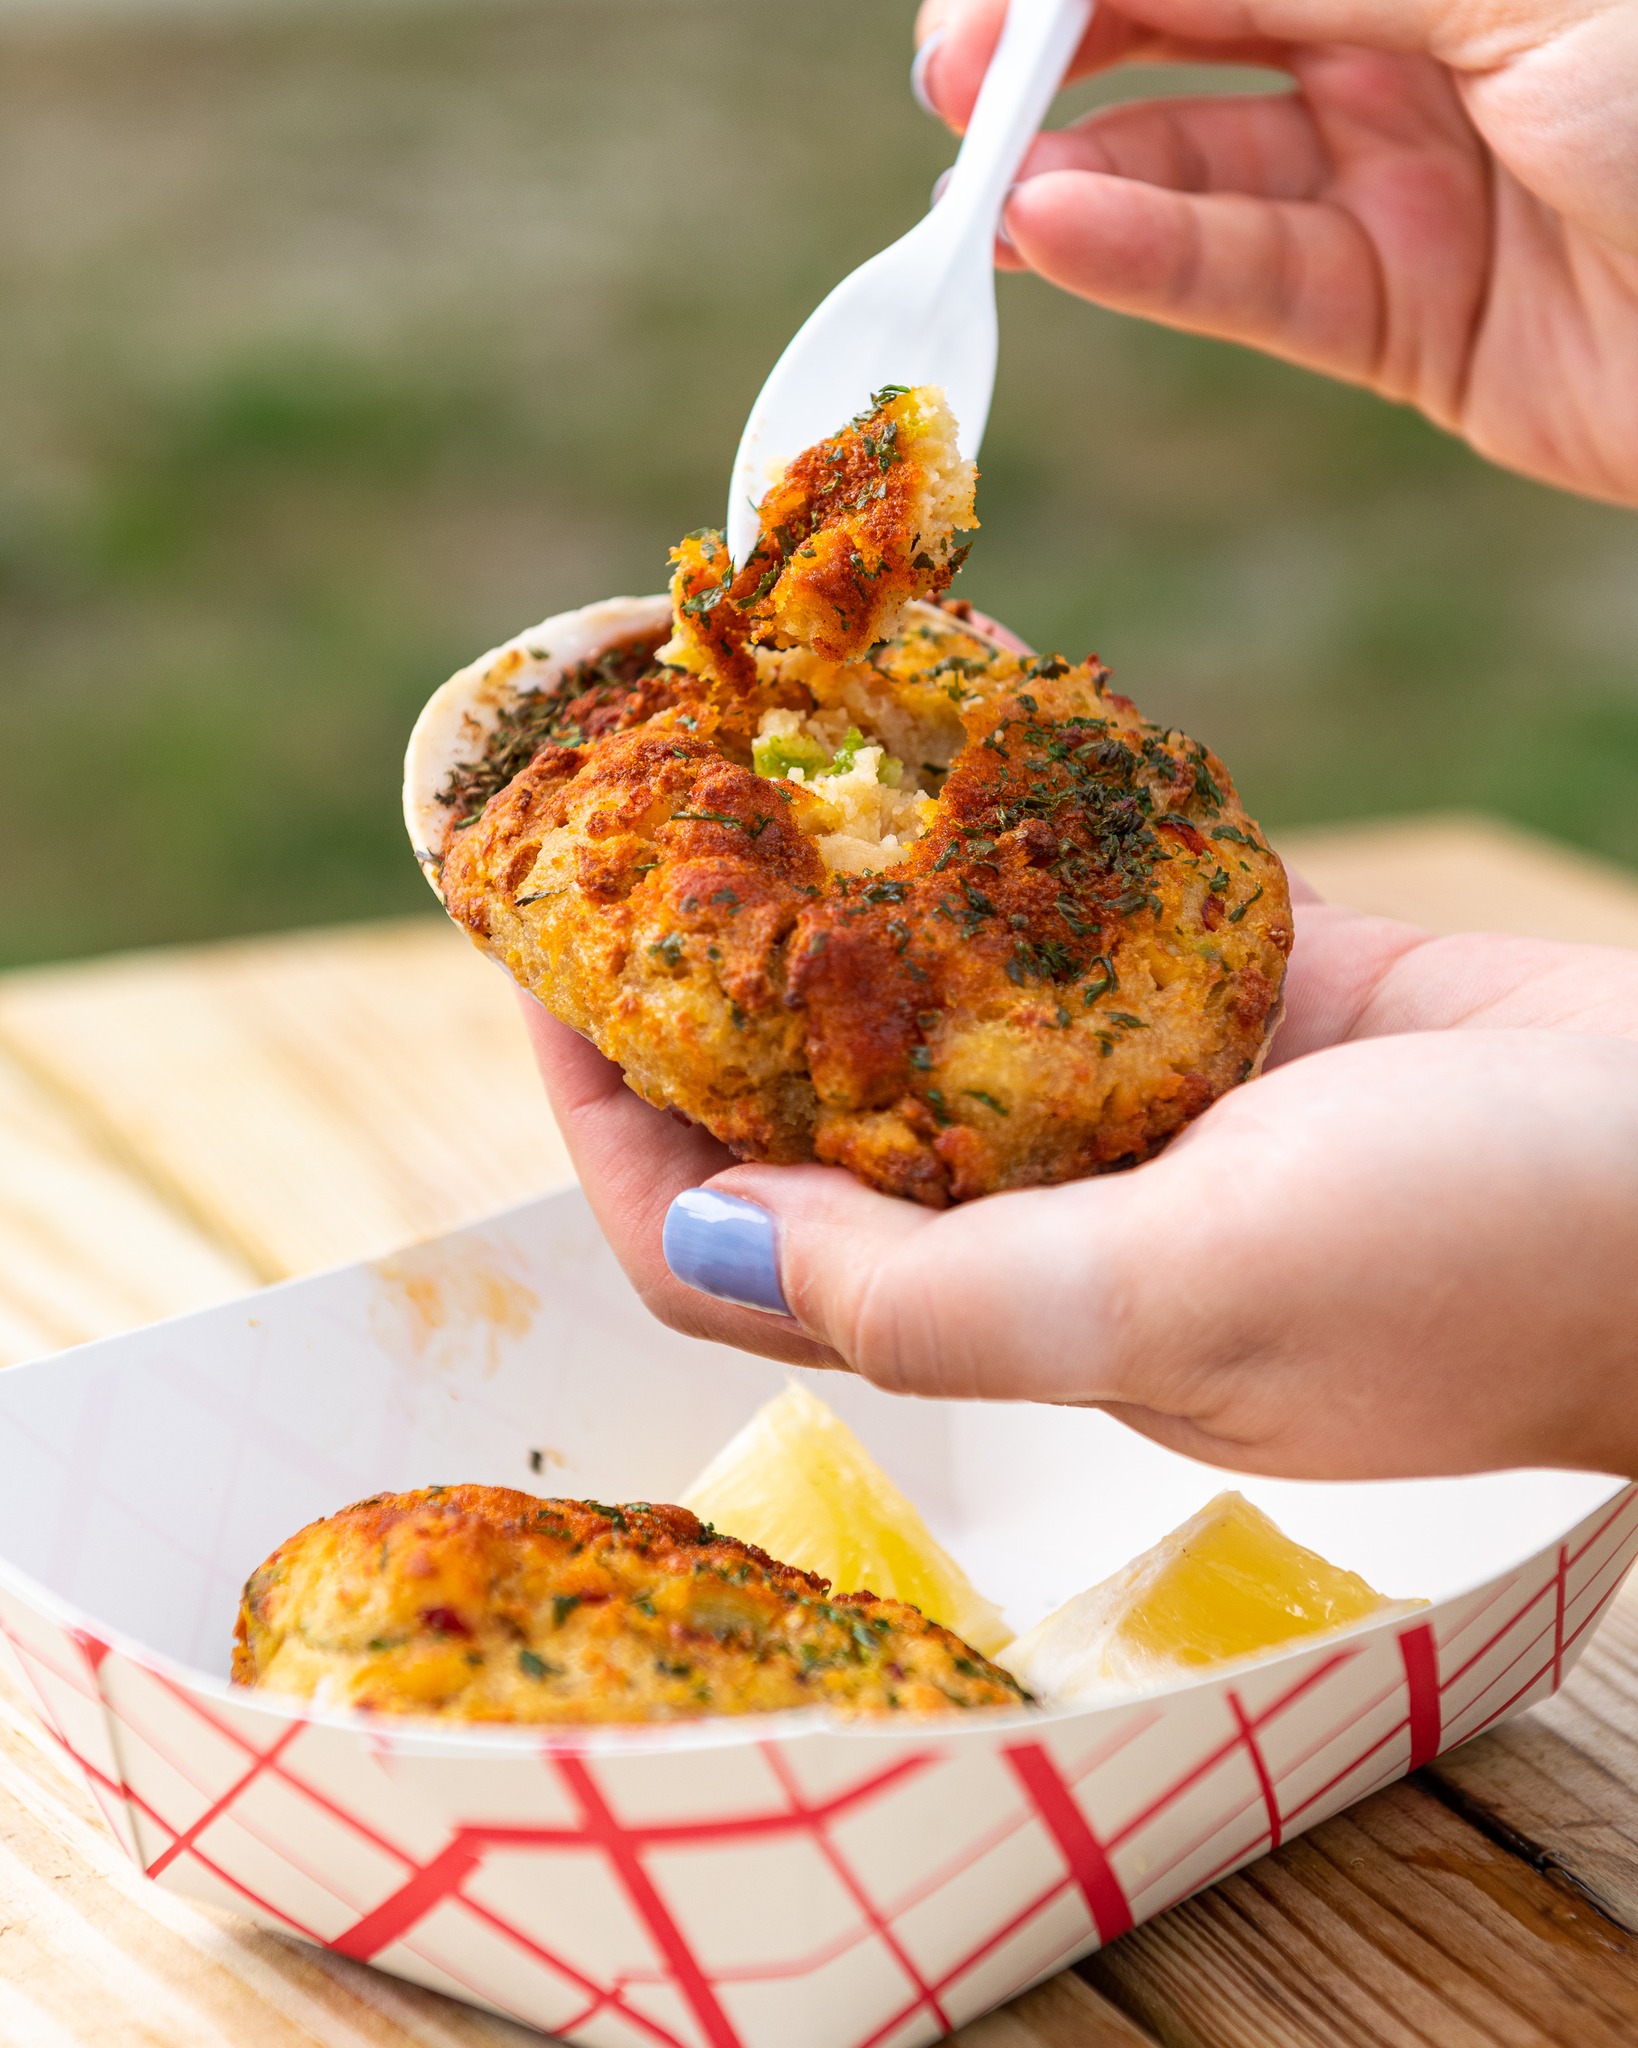 A hand holds up a stuffed quahog shell, using a plastic spoon to grab some of the stuffing.